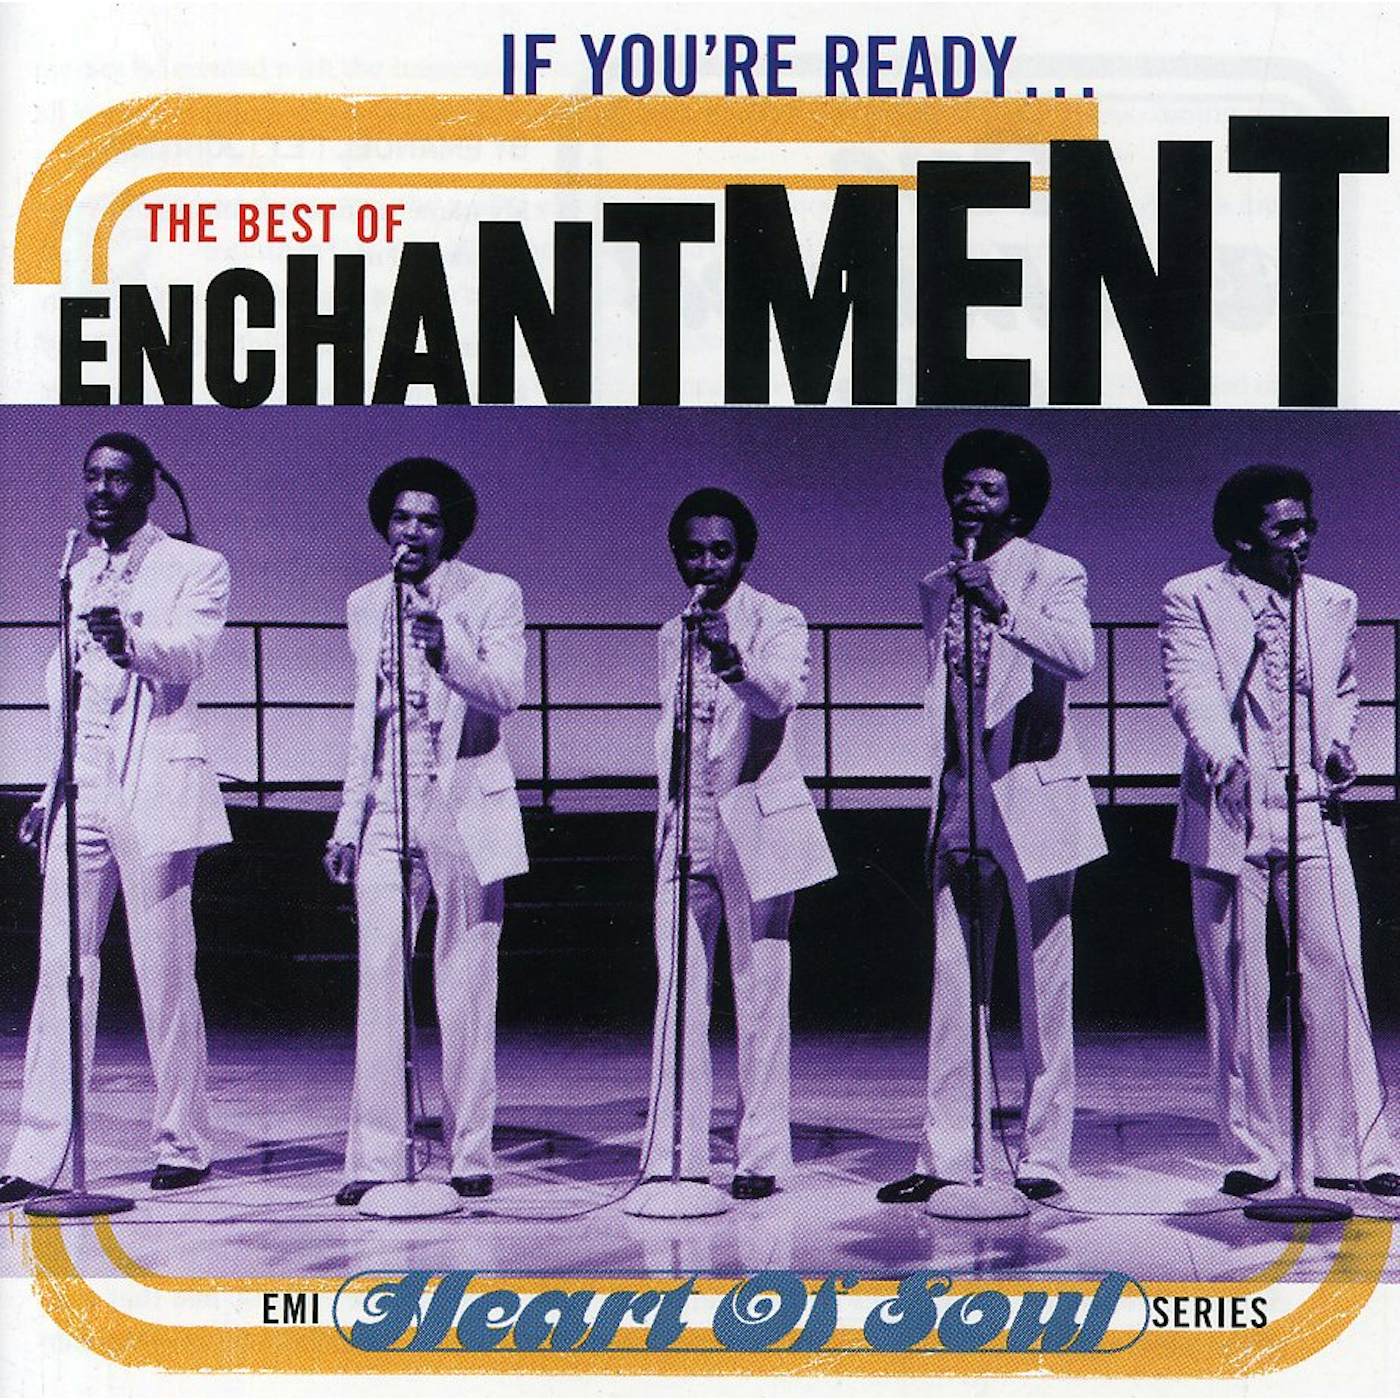 Enchantment IF YOU'RE READY: BEST OF CD